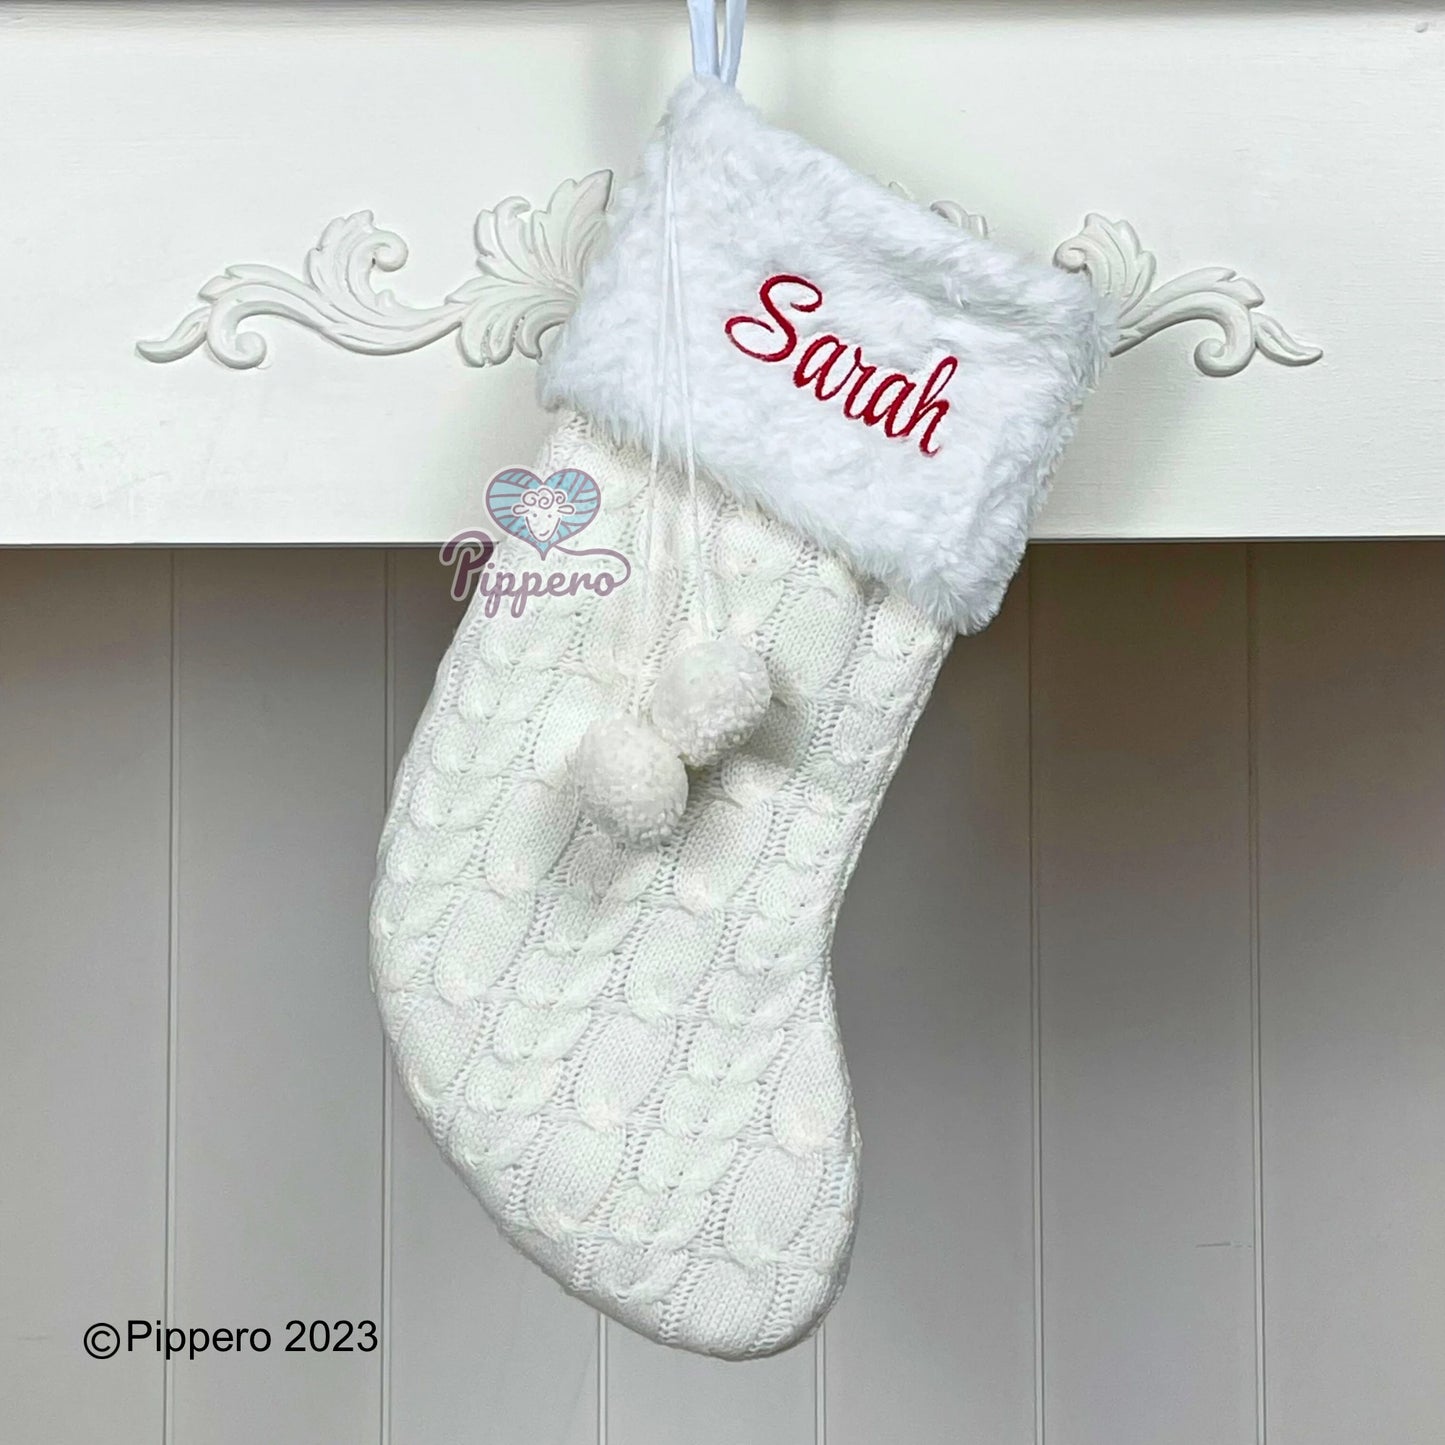 Custom Personalized Embroidered Classic Family Christmas Stockings with Furry Cuff and Poms Red Green White